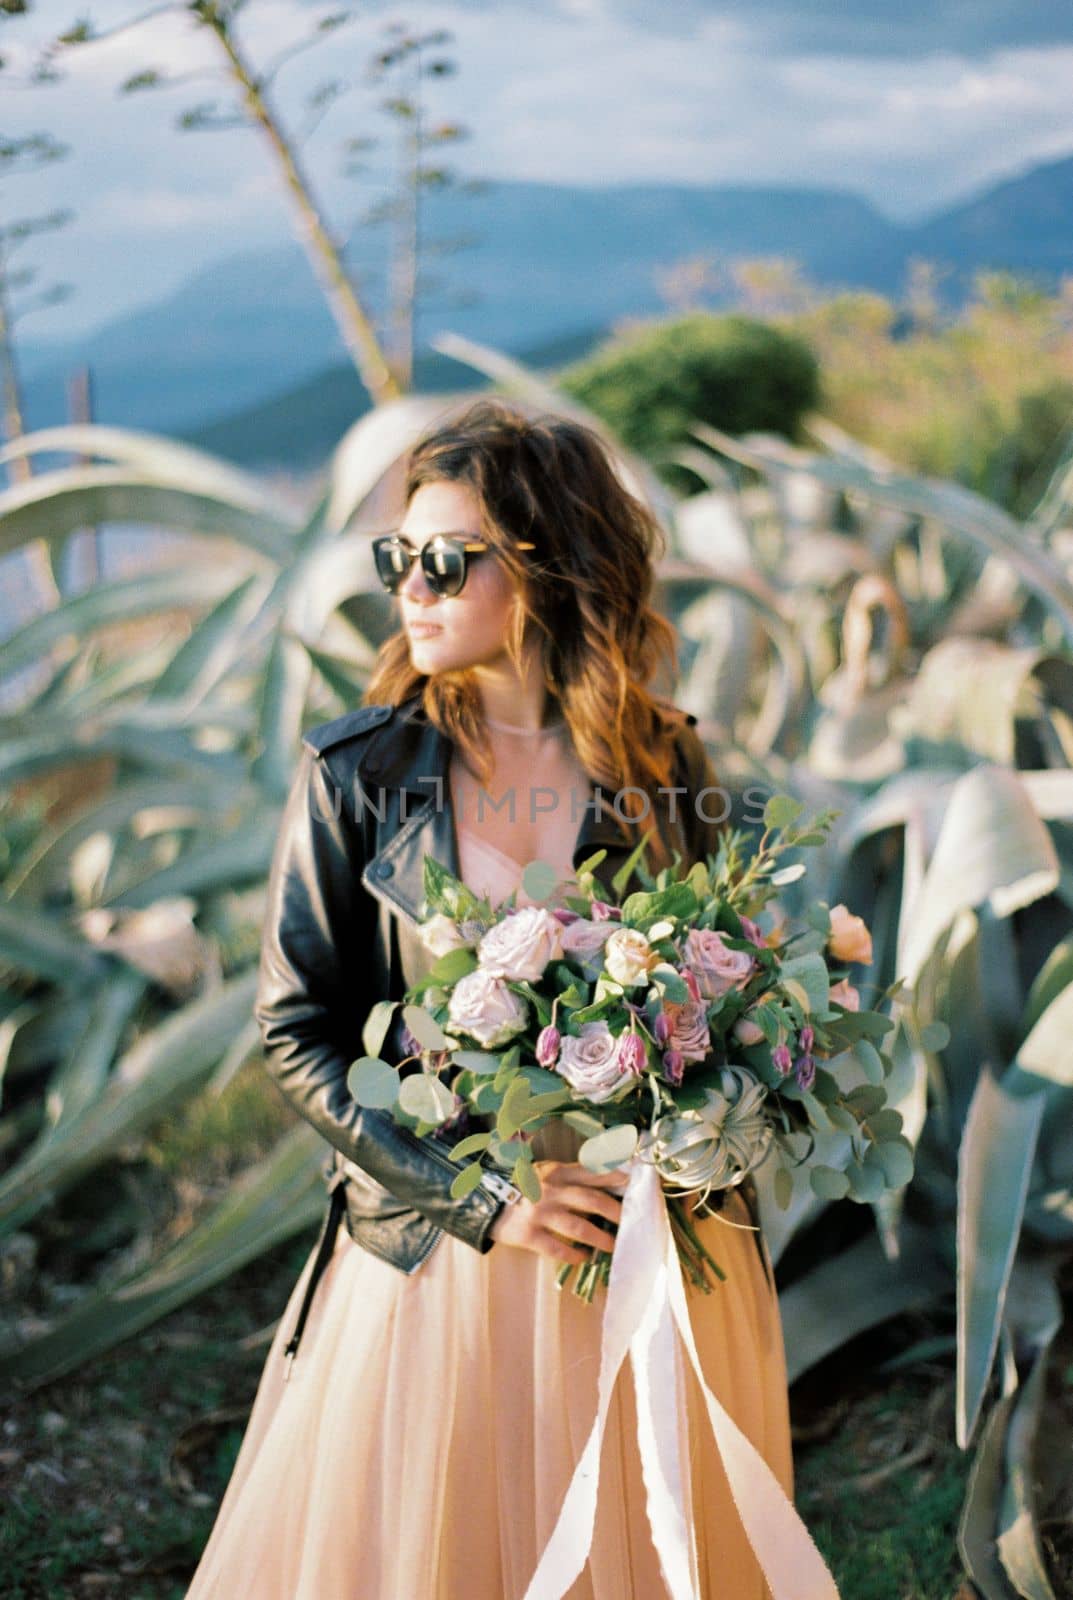 Bride in sunglasses with a bouquet of flowers stands near the agave bush. High quality photo